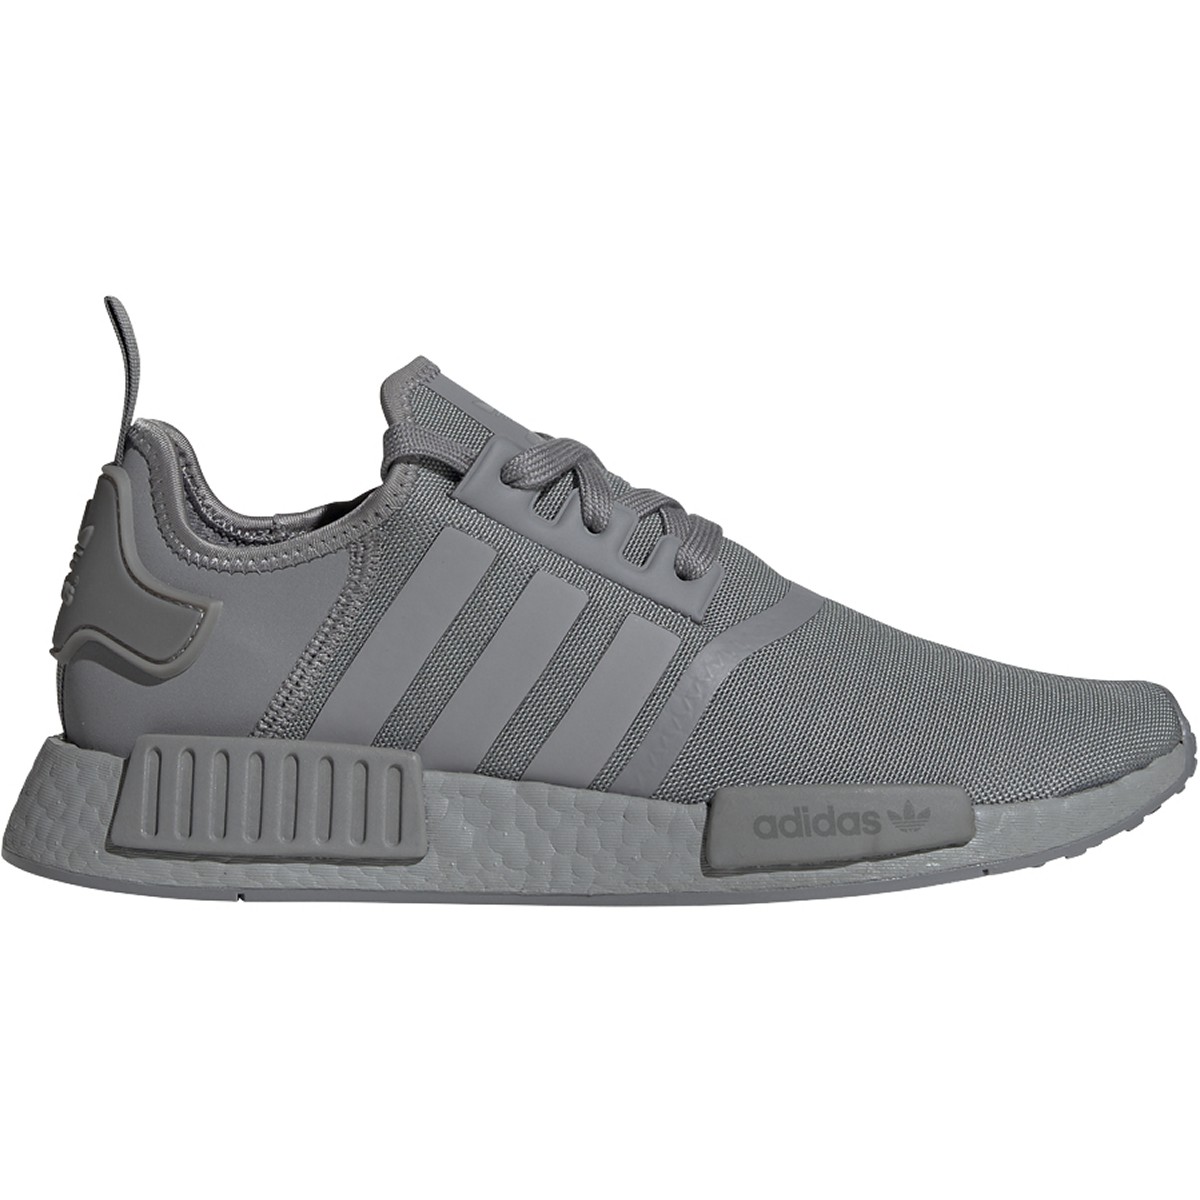 adidas Mens NMD_R1 Shoes Causal Boost 3 